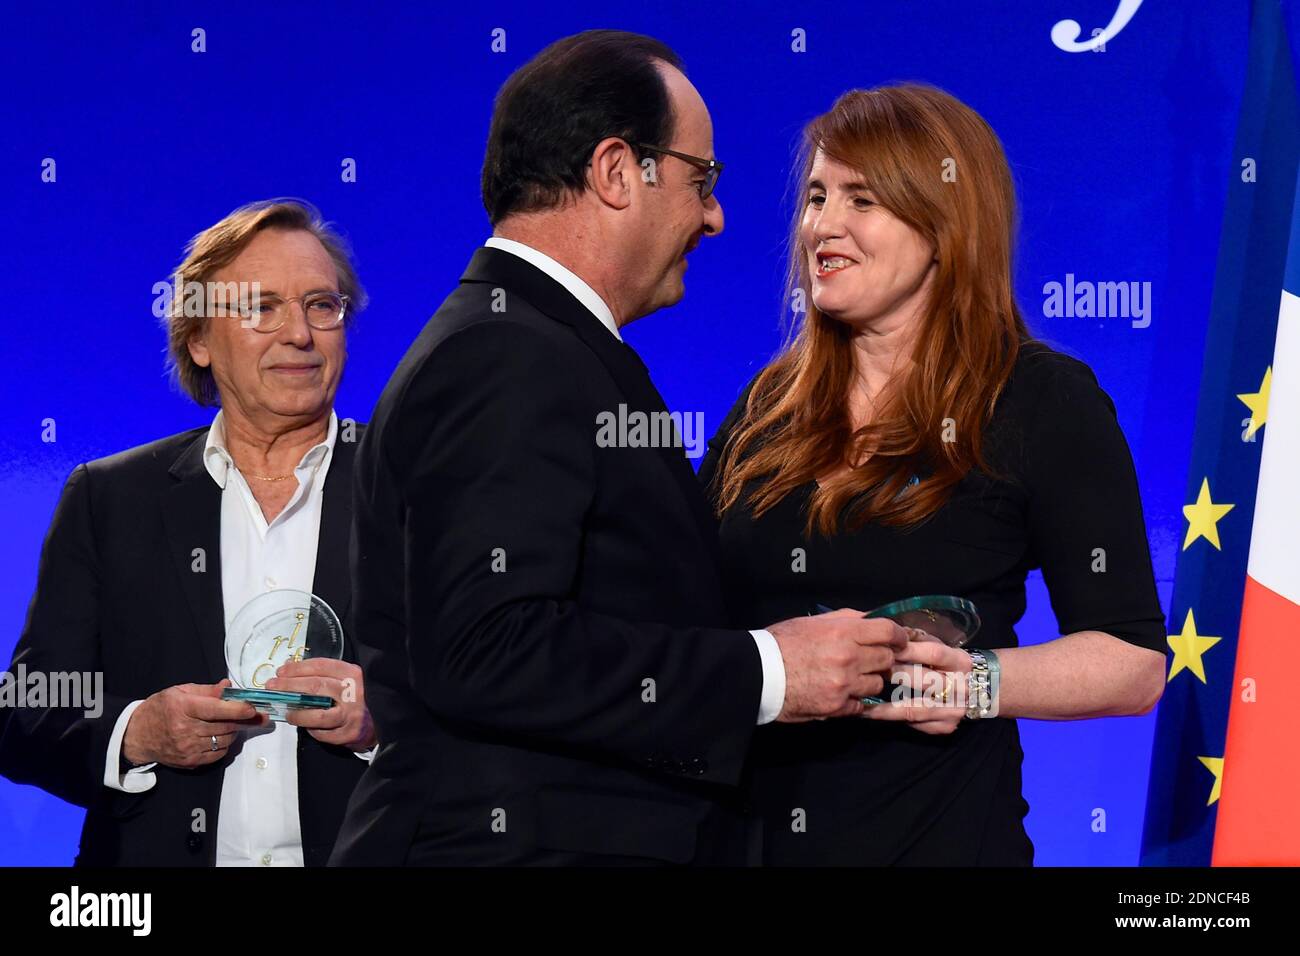 French President Francois Hollande presents producer Marie-Castille Mention-Schaar with a CRIF award as director Alexander Arcady looks on during the 30th annual Dinner of the Representative Council of the Jews of France (CRIF) held at the Pullman Montparnasse Hotel in Paris, France on February 23, 2015. Photo Pool by Erez Lichtfeld/ABACAPRESS.COM Stock Photo